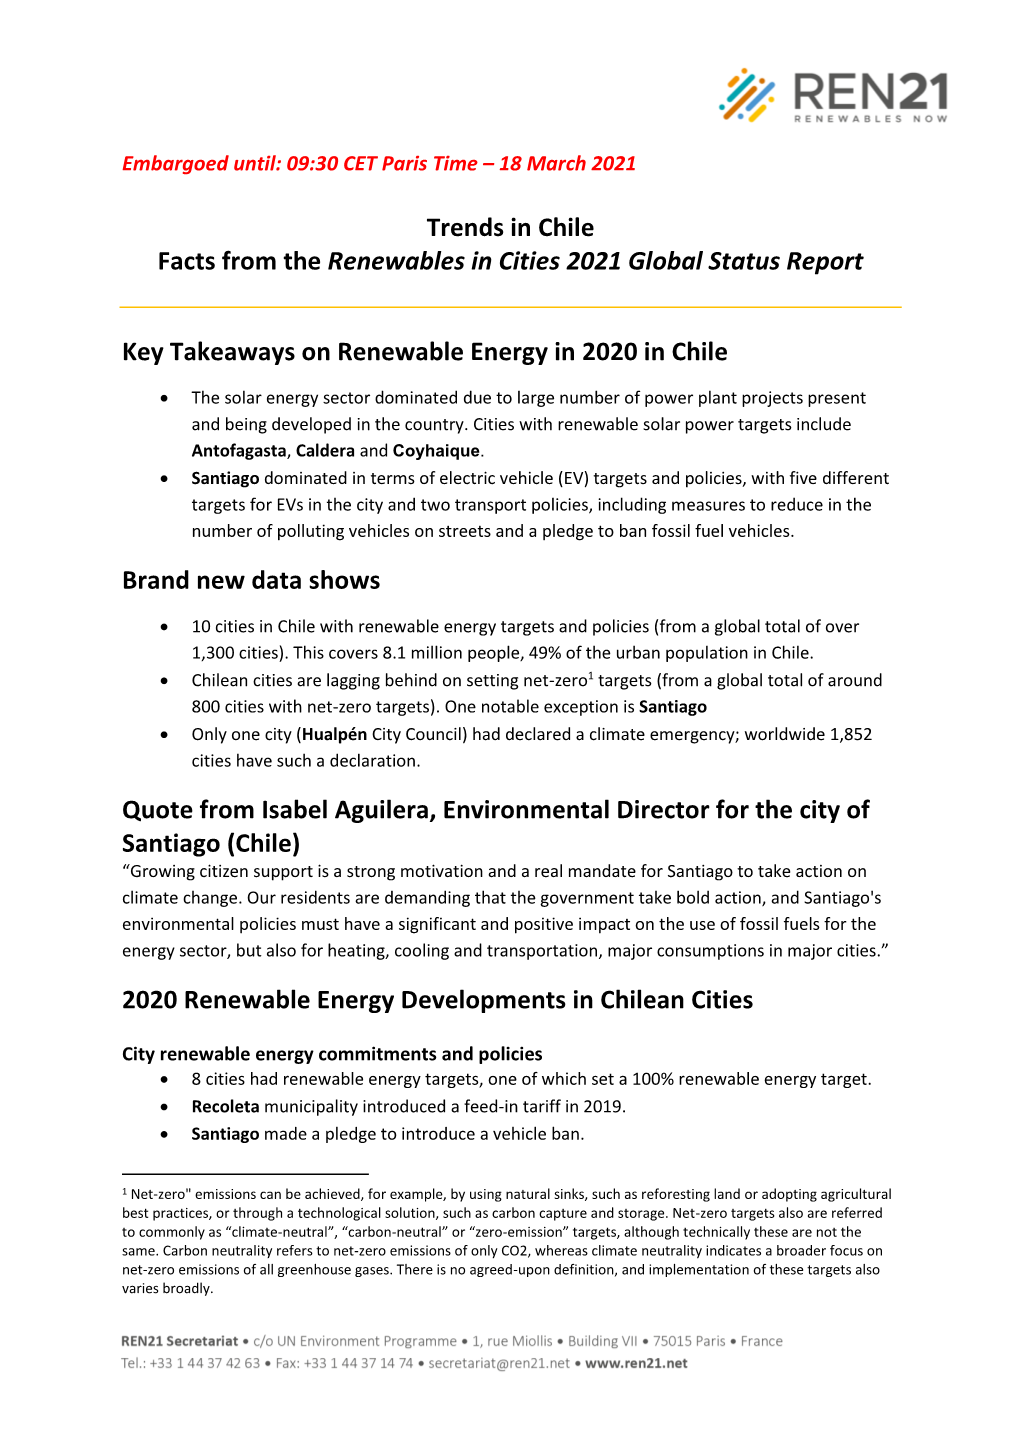 Chile Facts from the Renewables in Cities 2021 Global Status Report